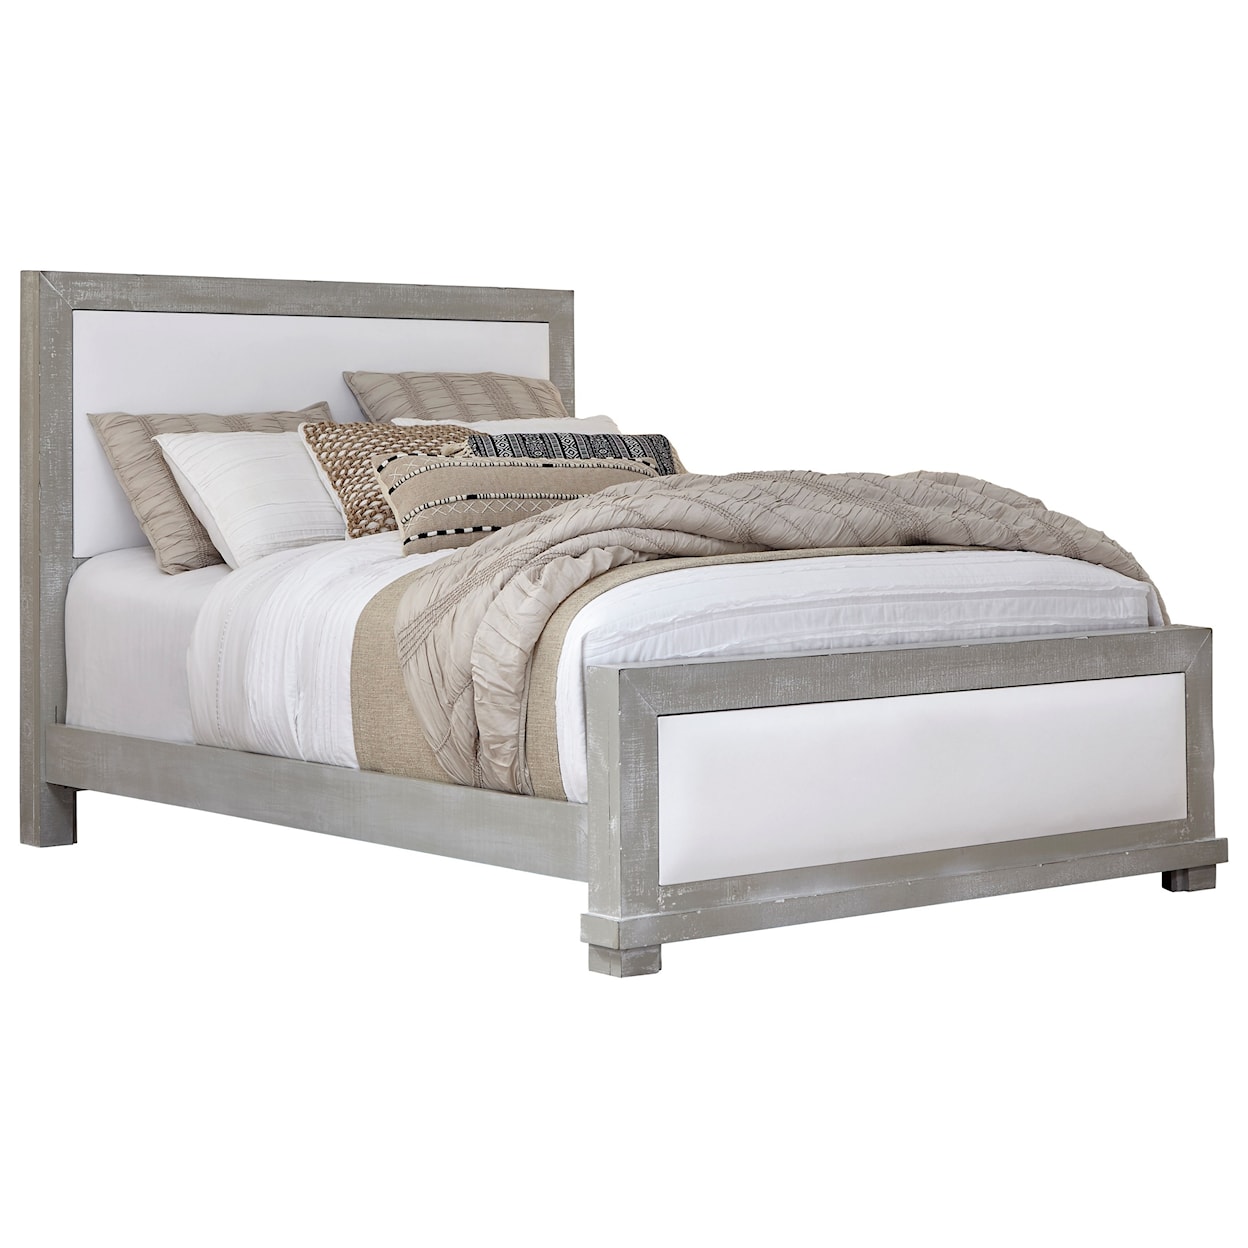 Carolina Chairs Willow Queen Upholstered Headboard